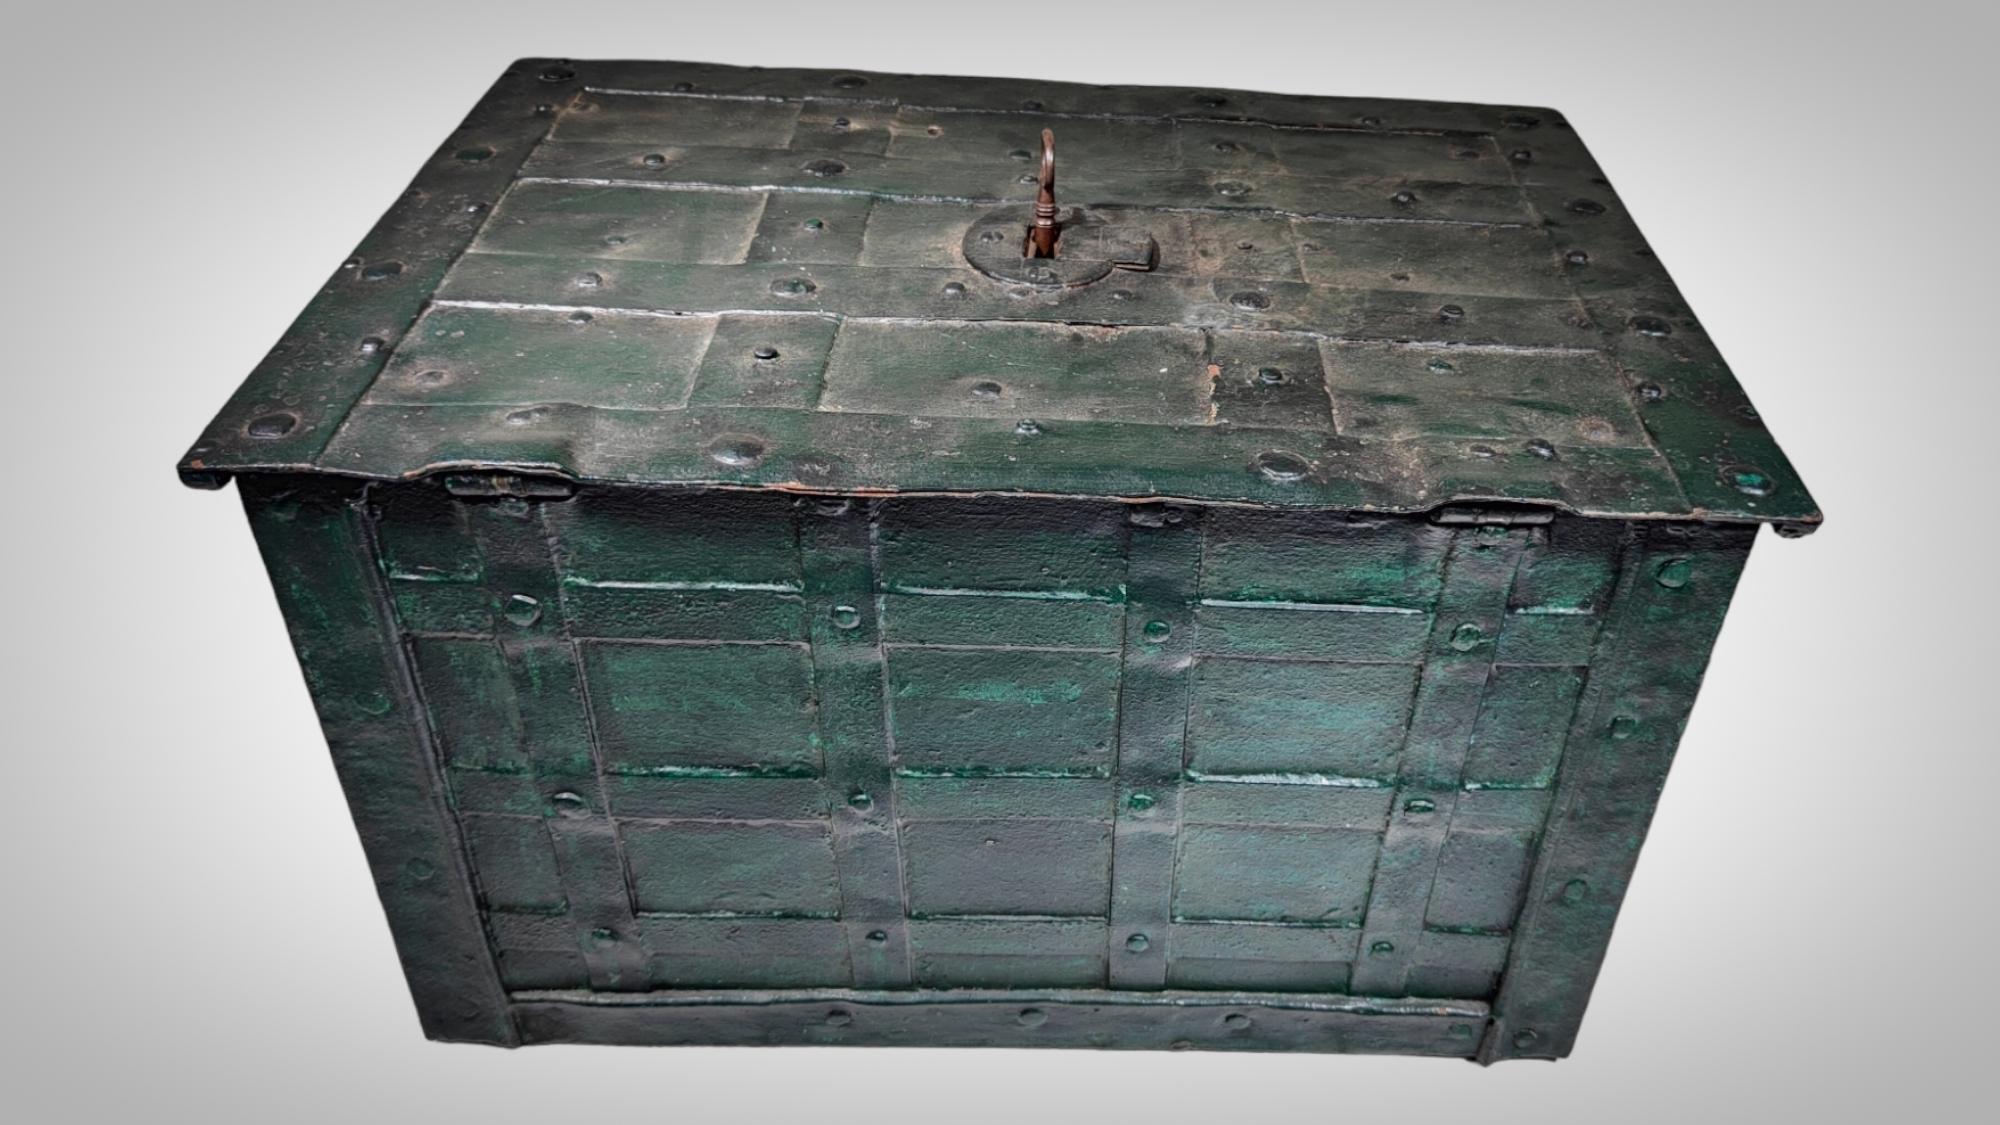 17th Century Iron Safe
Old safe for collecting money or valuables from the 17th century in hand-forged iron and including its original key. The lock works perfectly. It has a rear wooden support to display the box. Box dimensions: 64x46x40 cm